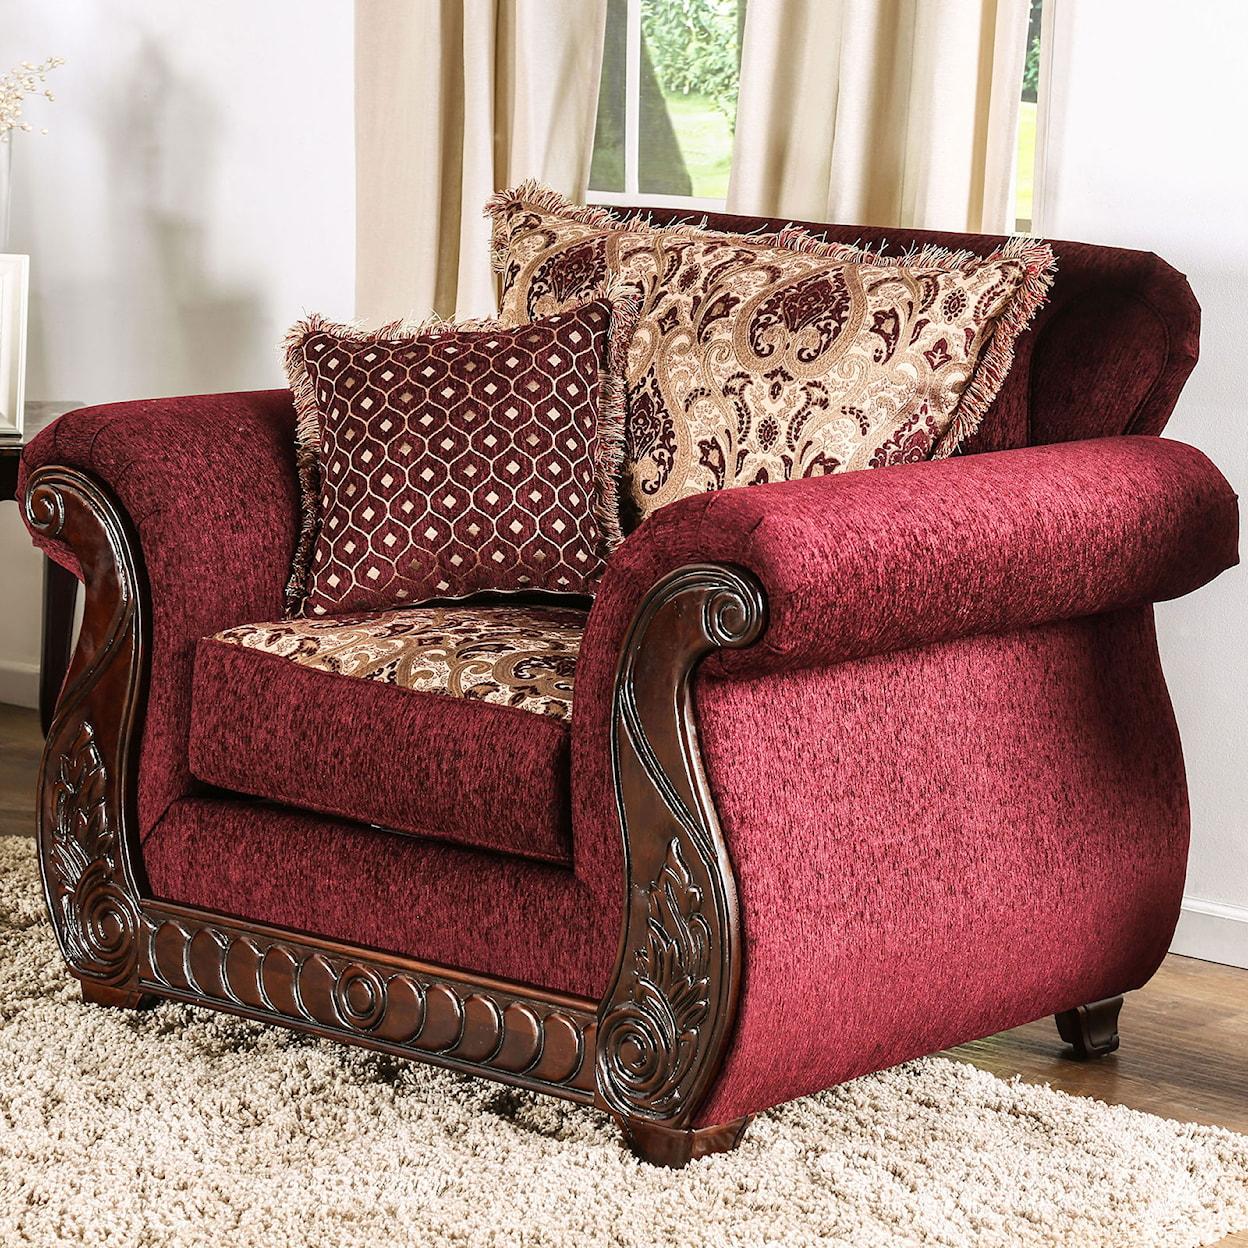 Furniture of America Tabitha Upholstered Chair